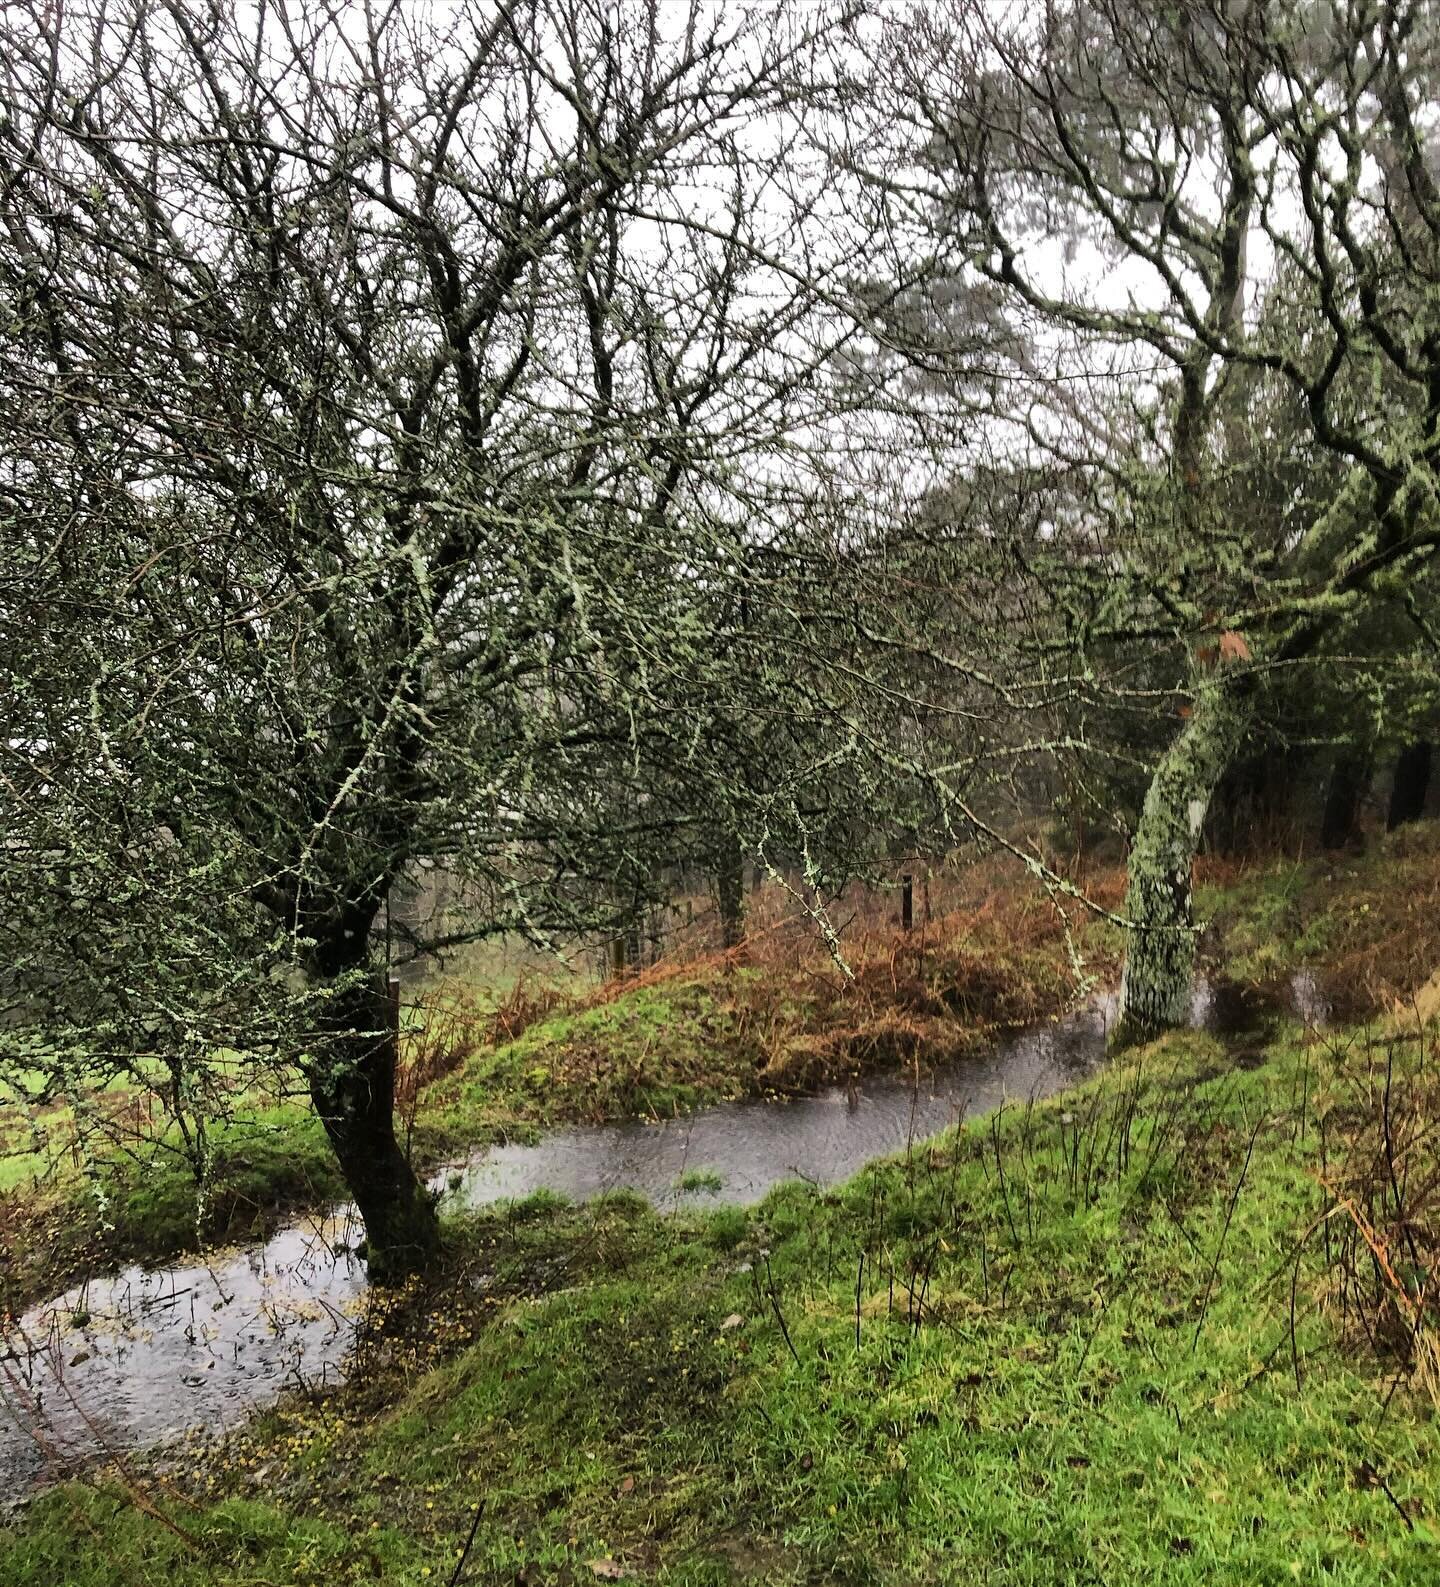 &ldquo;Sunshine is delicious, rain is refreshing, wind braces us up, snow is exhilarating; there is really no such thing as bad weather, only different kinds of good weather.&rdquo;
John Ruskin

It&rsquo;s very wet up at Trill on the Hill today. We h